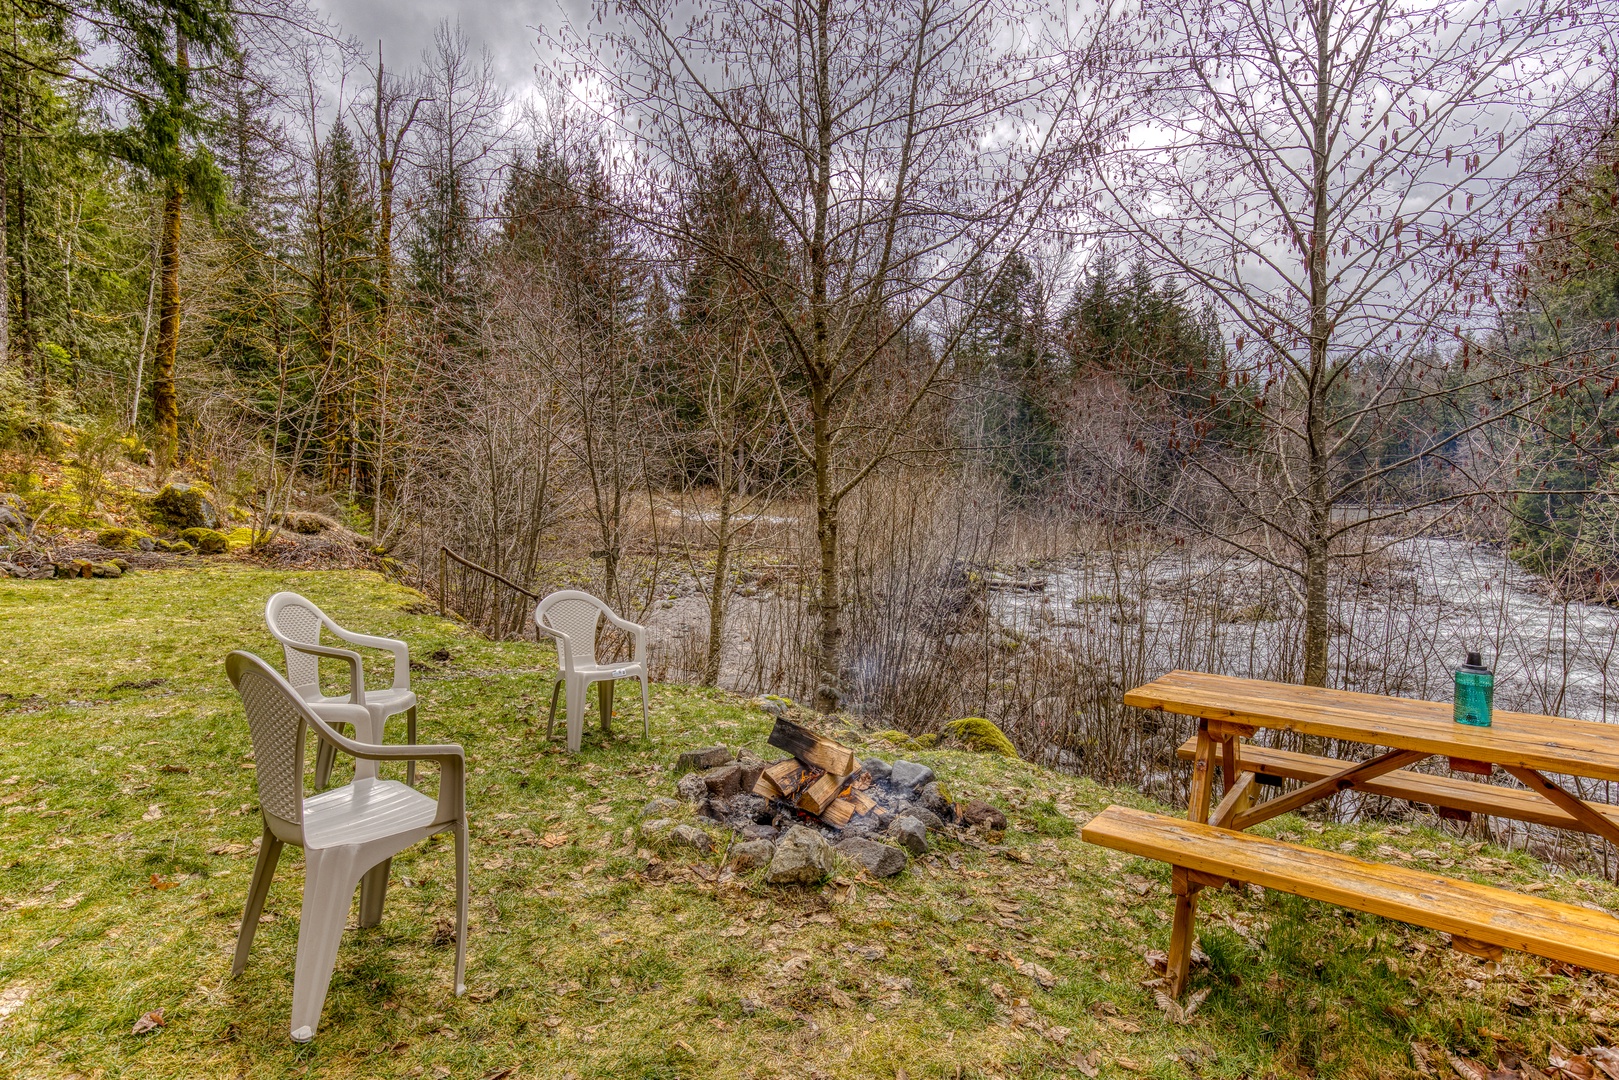 Rhododendron Vacation Rentals, Riverbend Cabin #2 - Sitting area in front of the fire pit is the perfect spot for a pic nic!